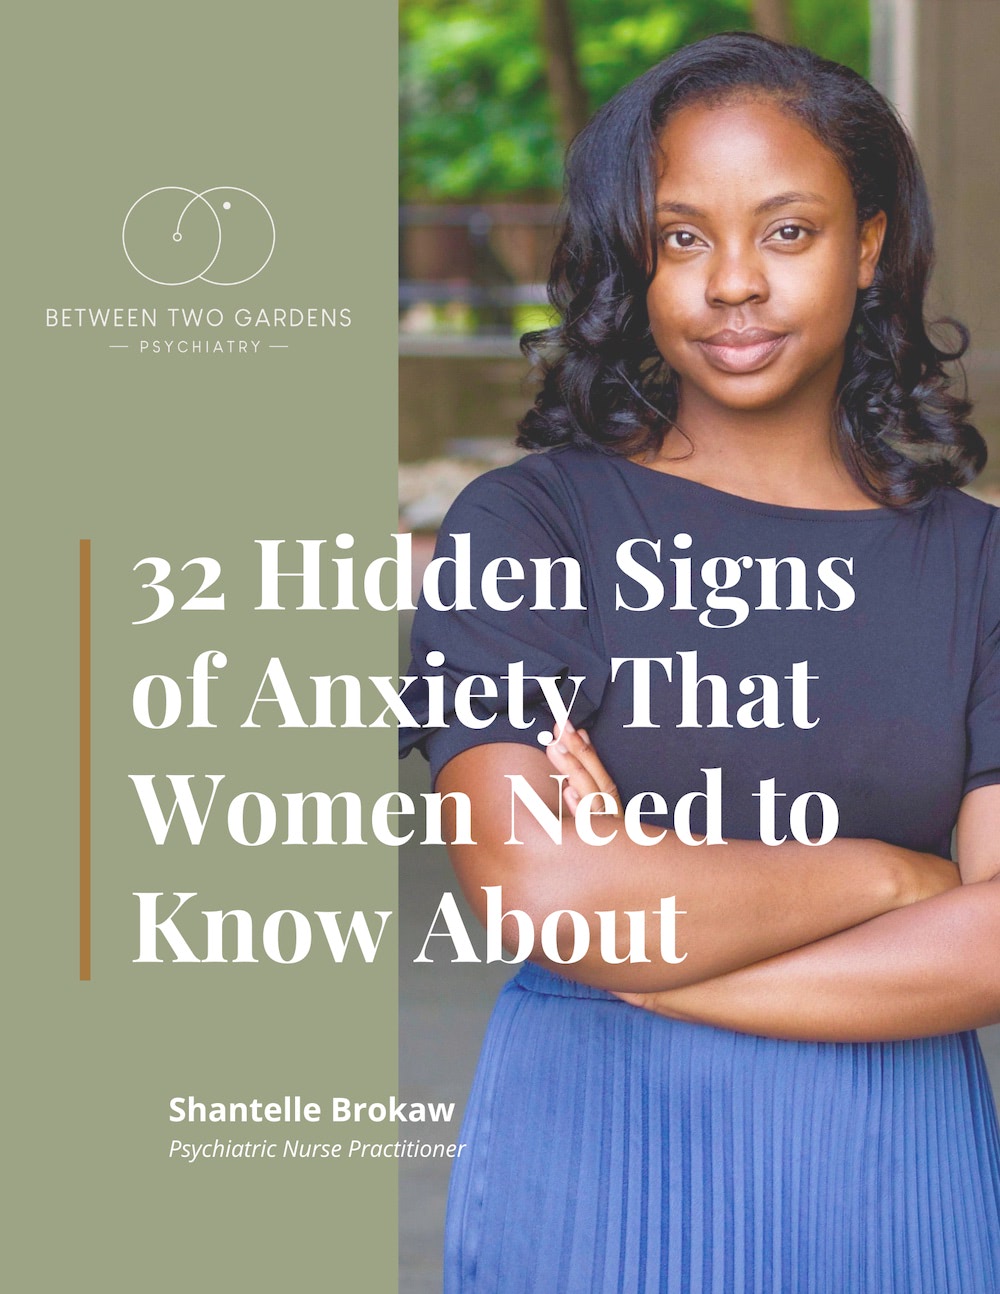 Hidden Signs of Anxiety That Women Need to Know About